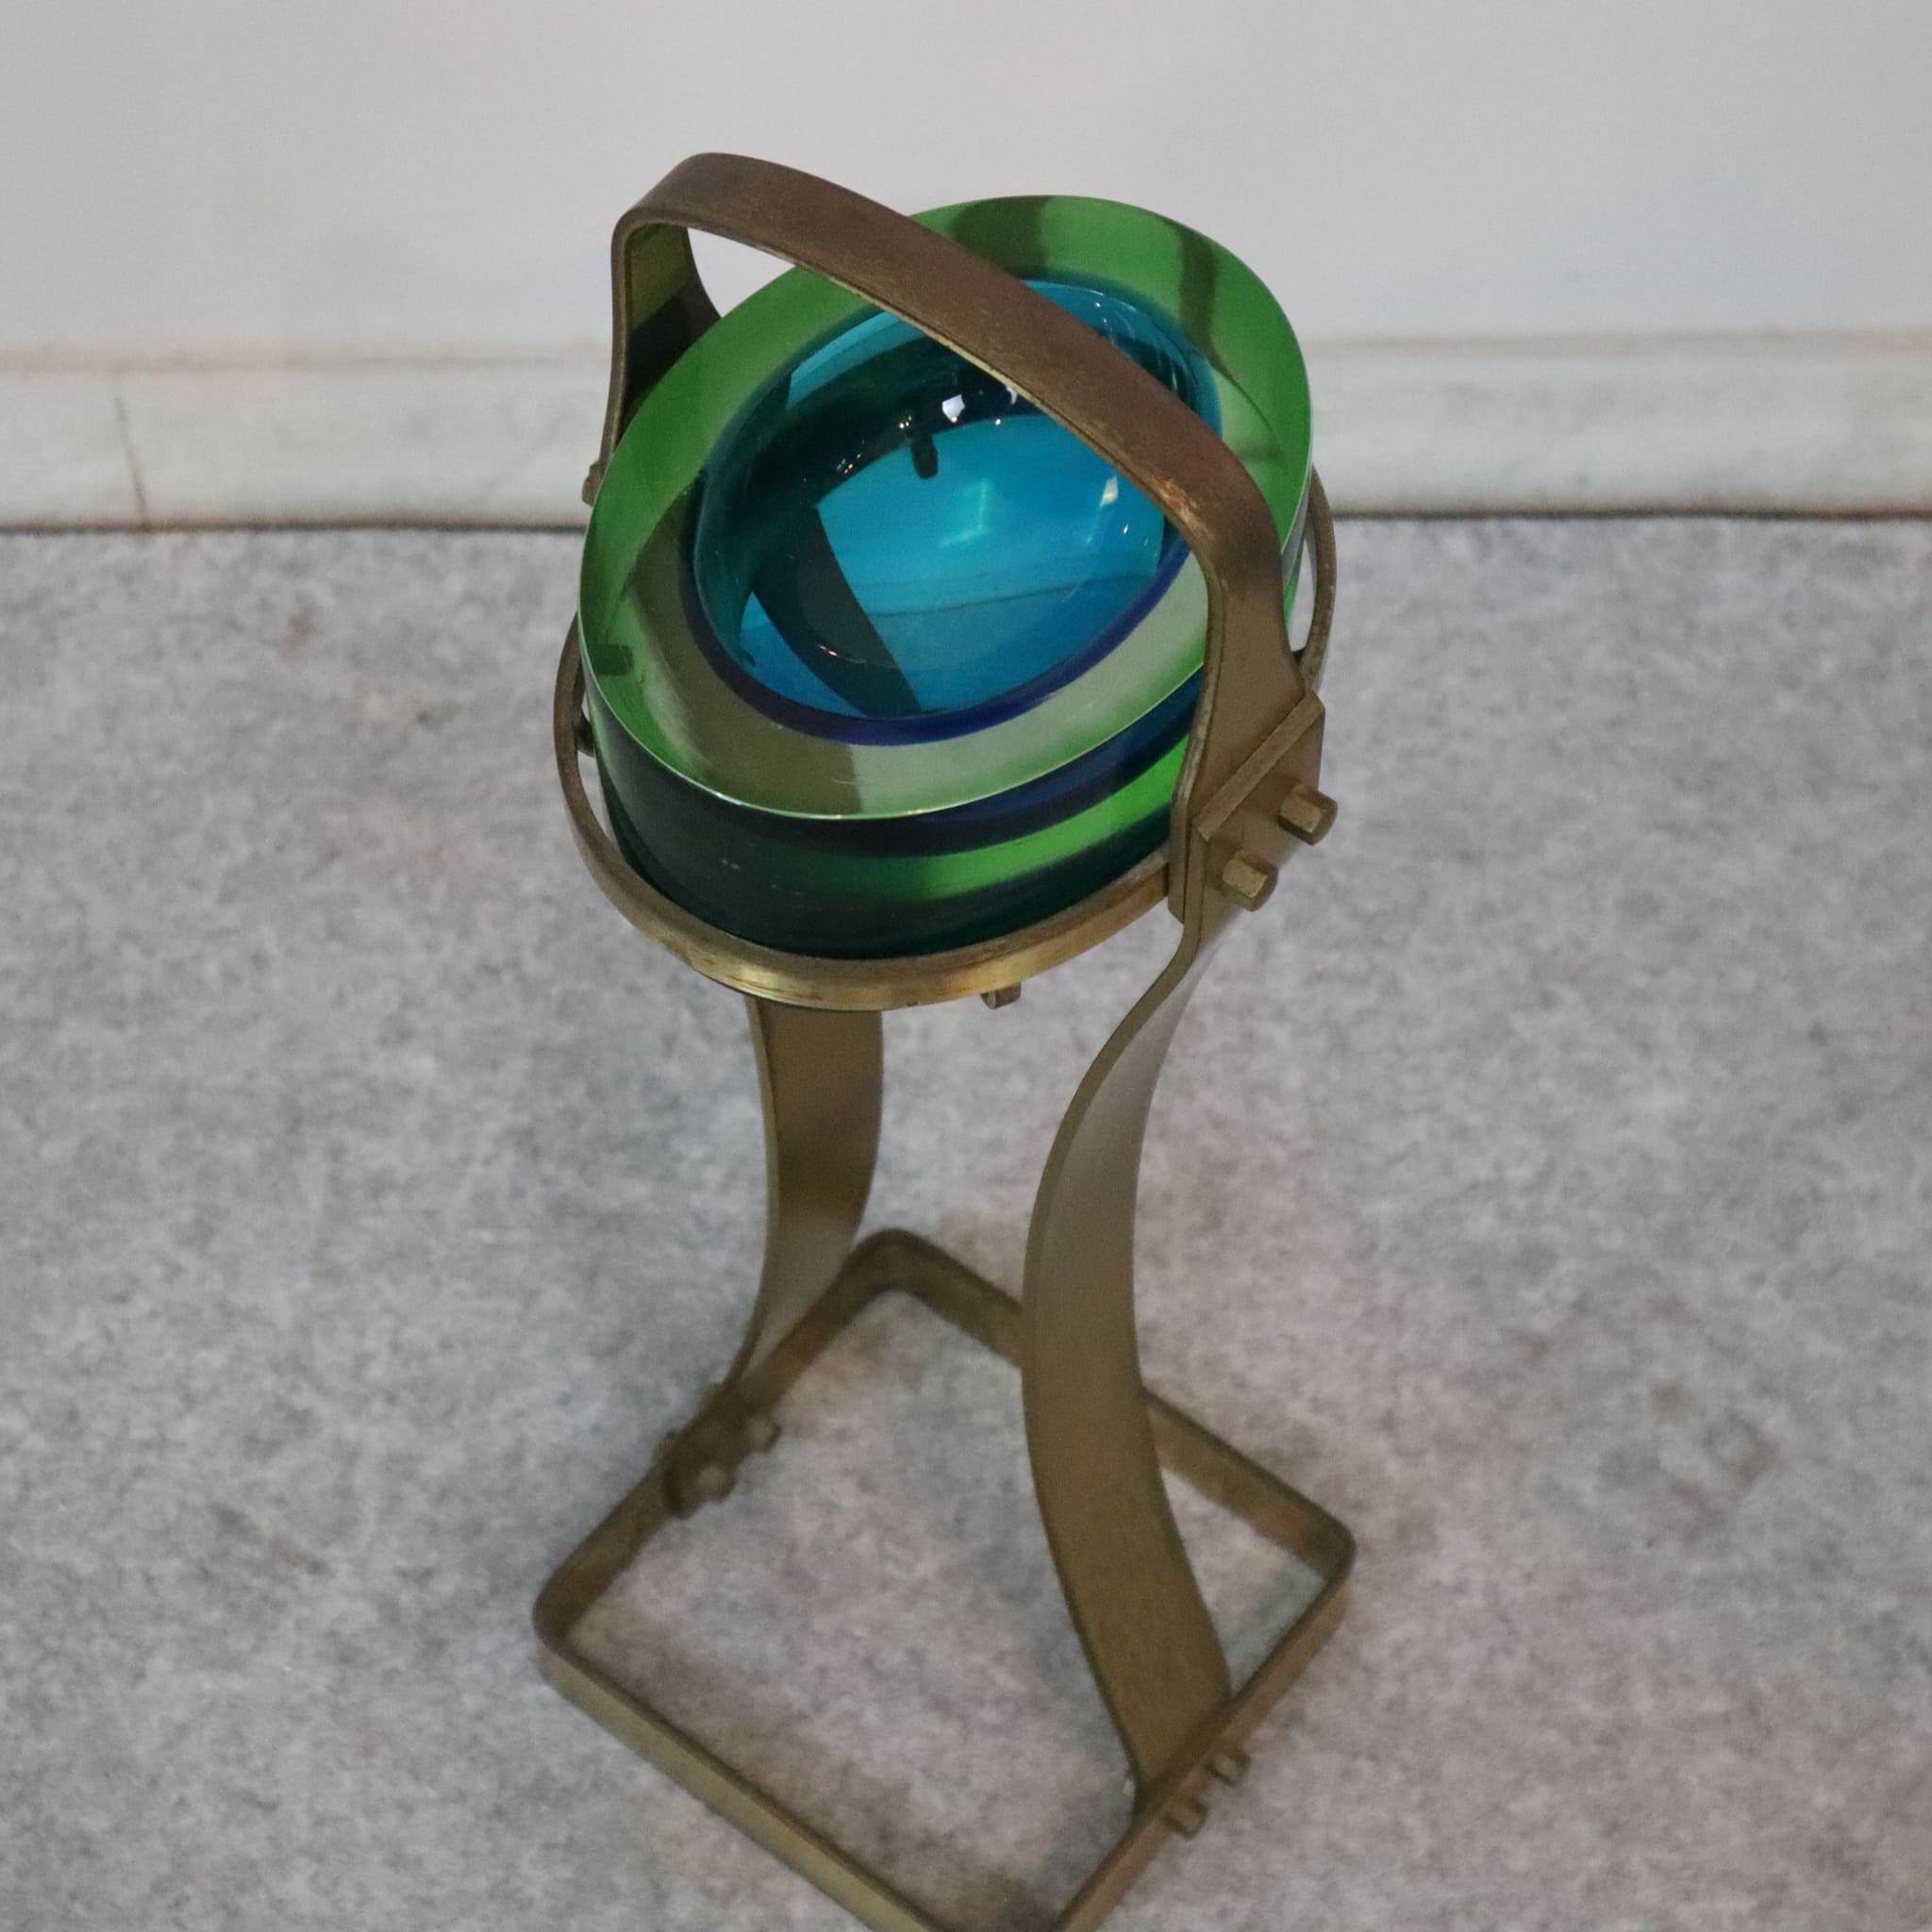 visionidepoca-modern-art-ashtray-entrance-vintage-60s-70s-brass-structure-base-in-murano-glass-green-and-blue-view-from-above